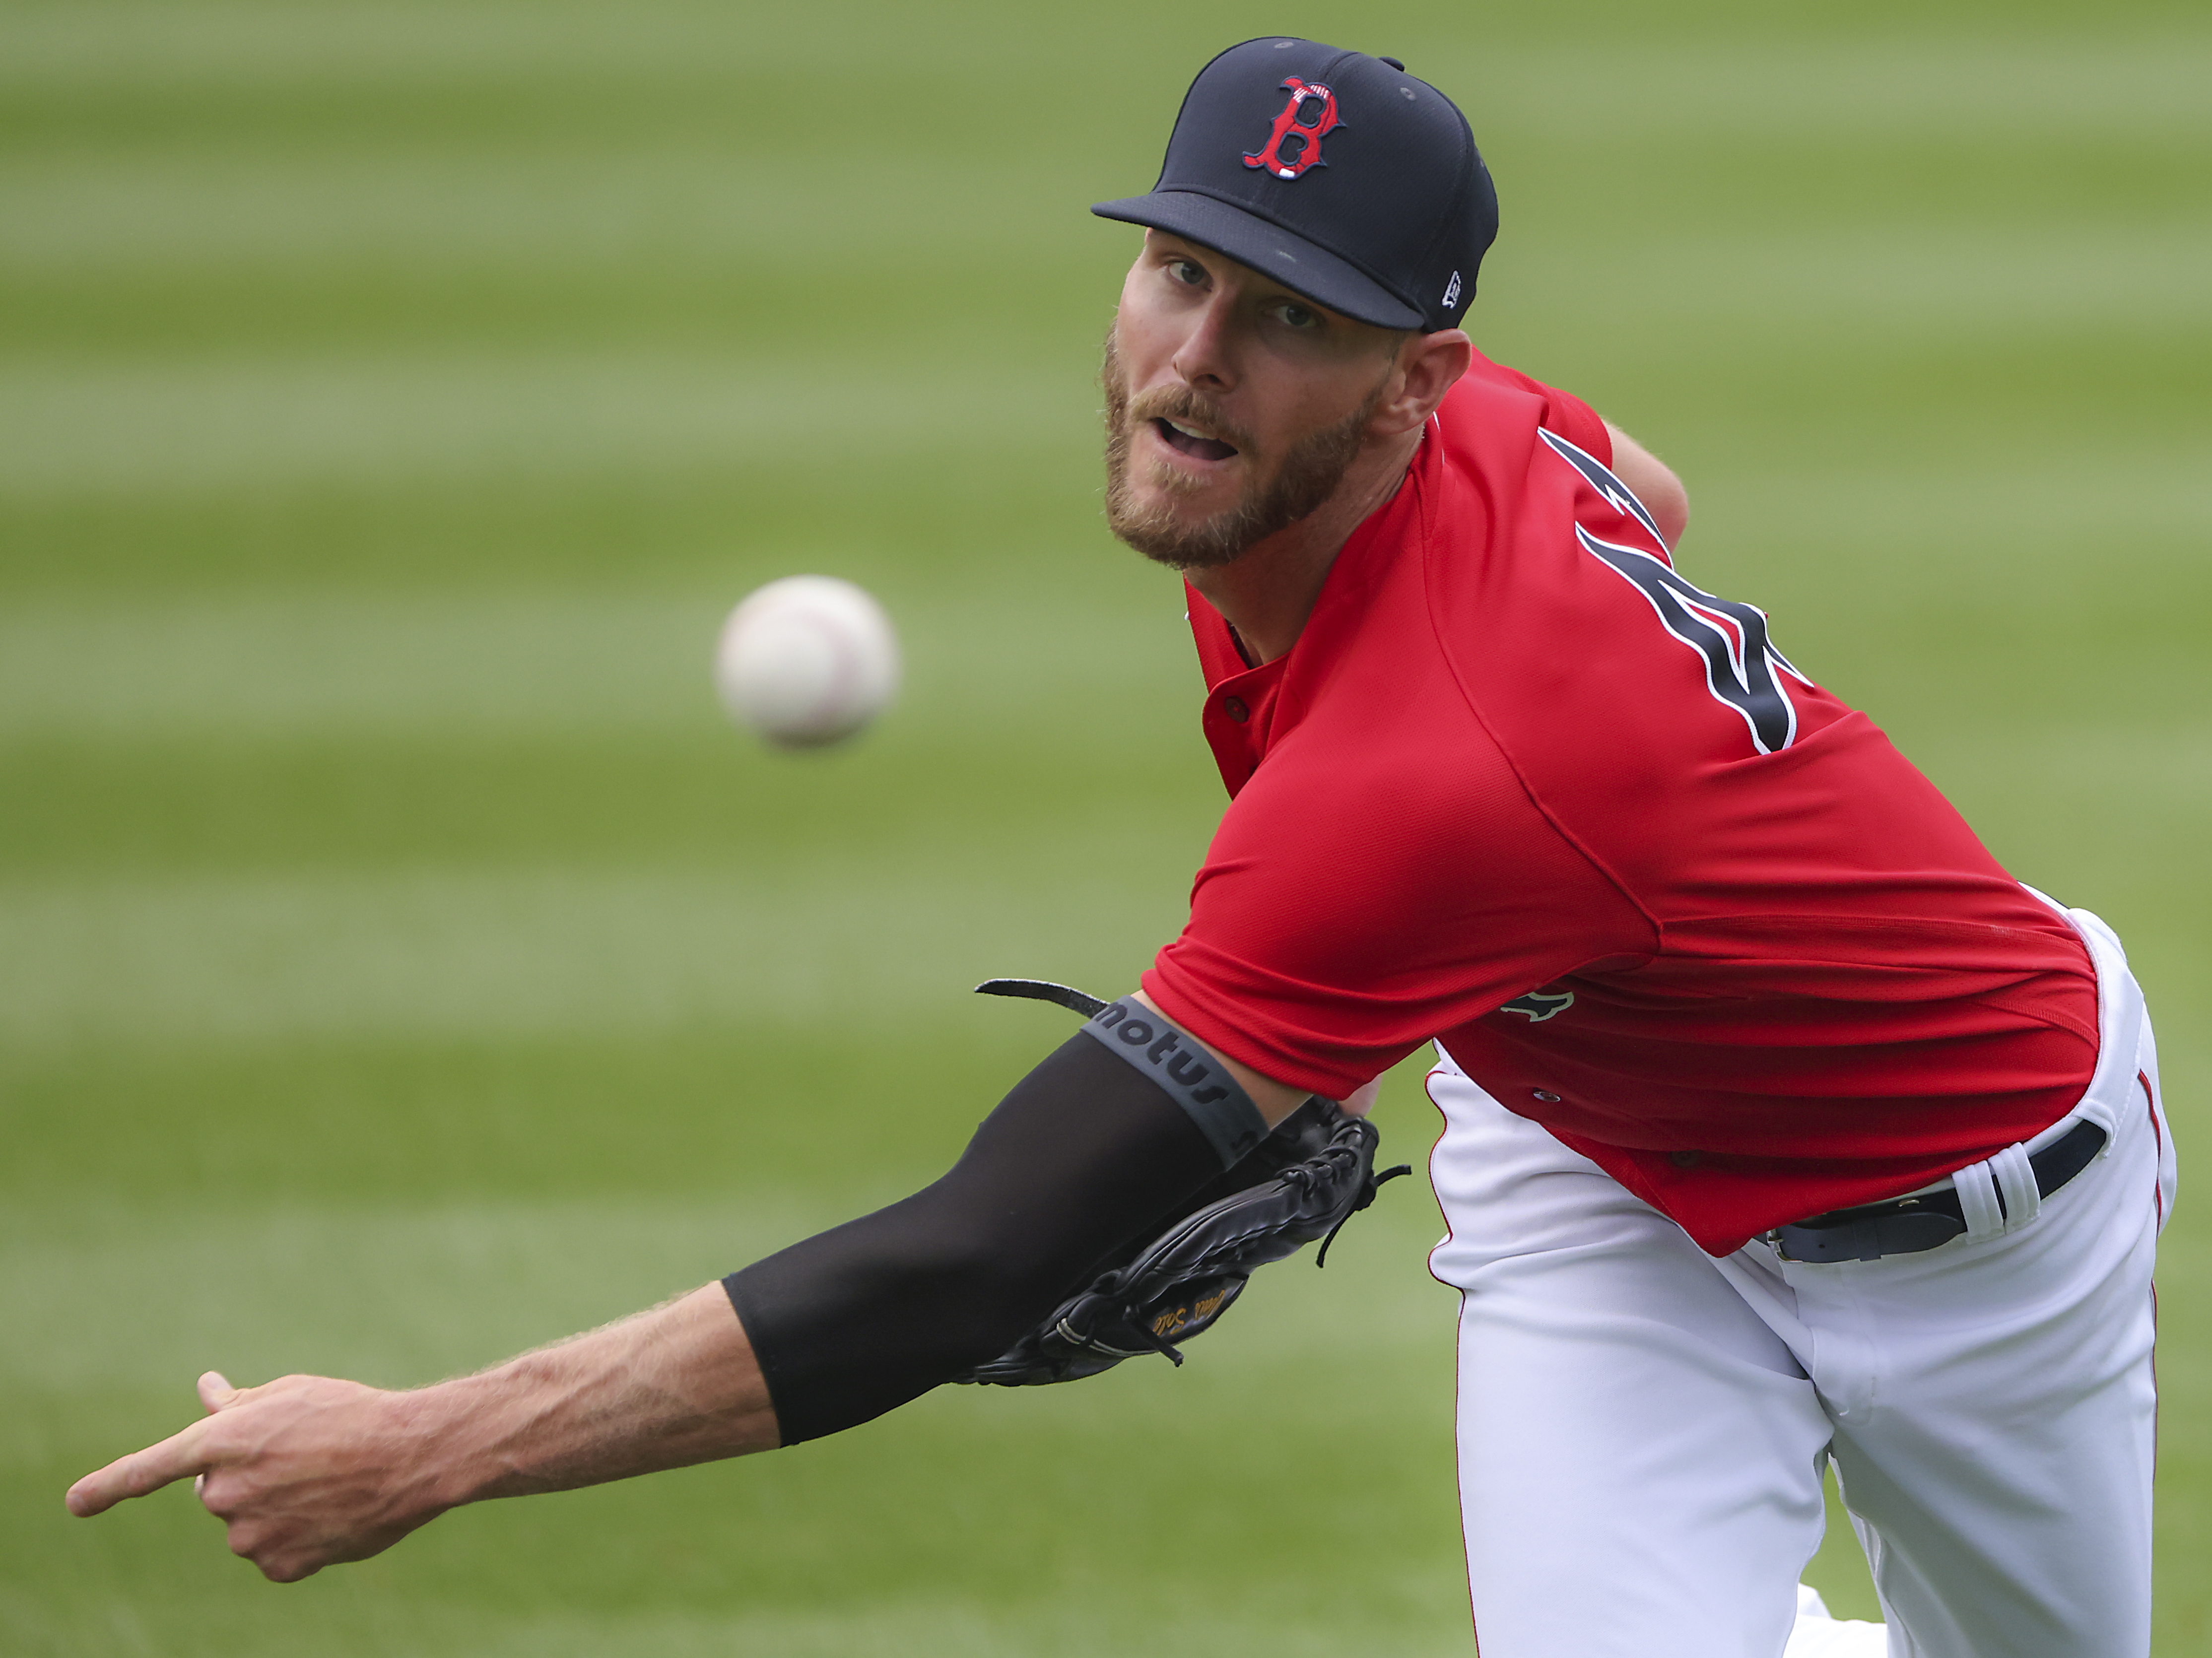 Chris Sale practically perfect in first game back from injury, Sox